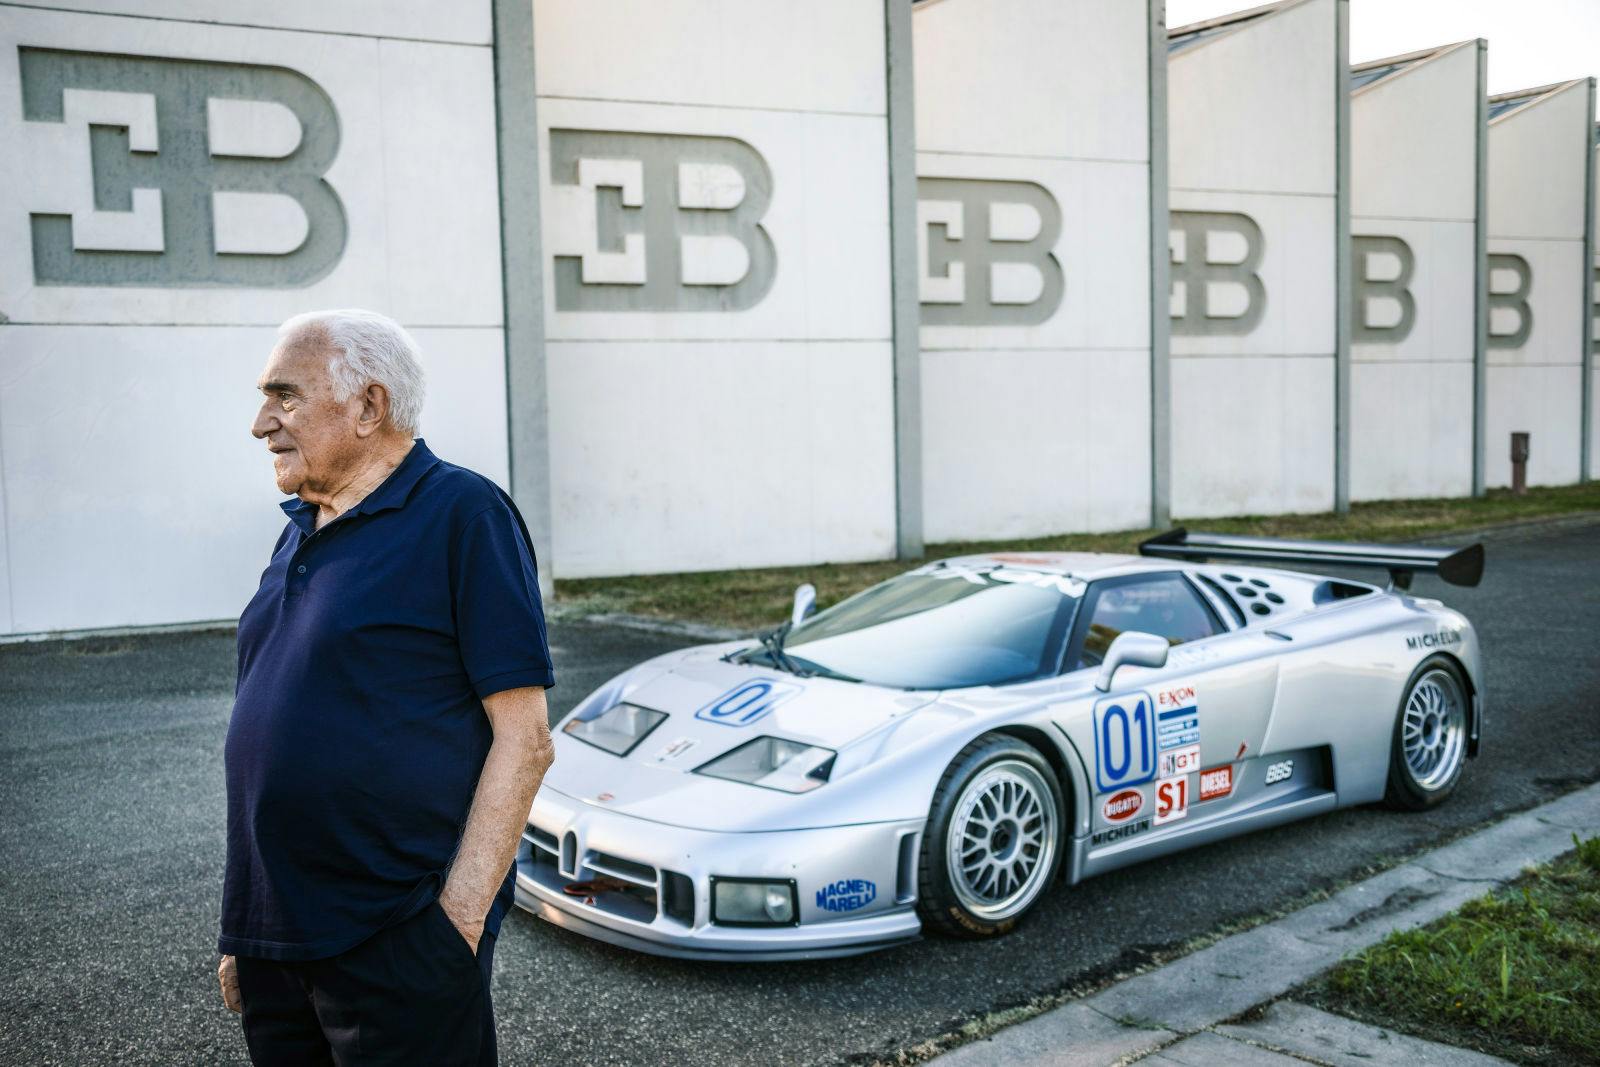 Celebrating 30 years of the EB110 at the ‘Fabbrica Blu’ in Campogalliano.